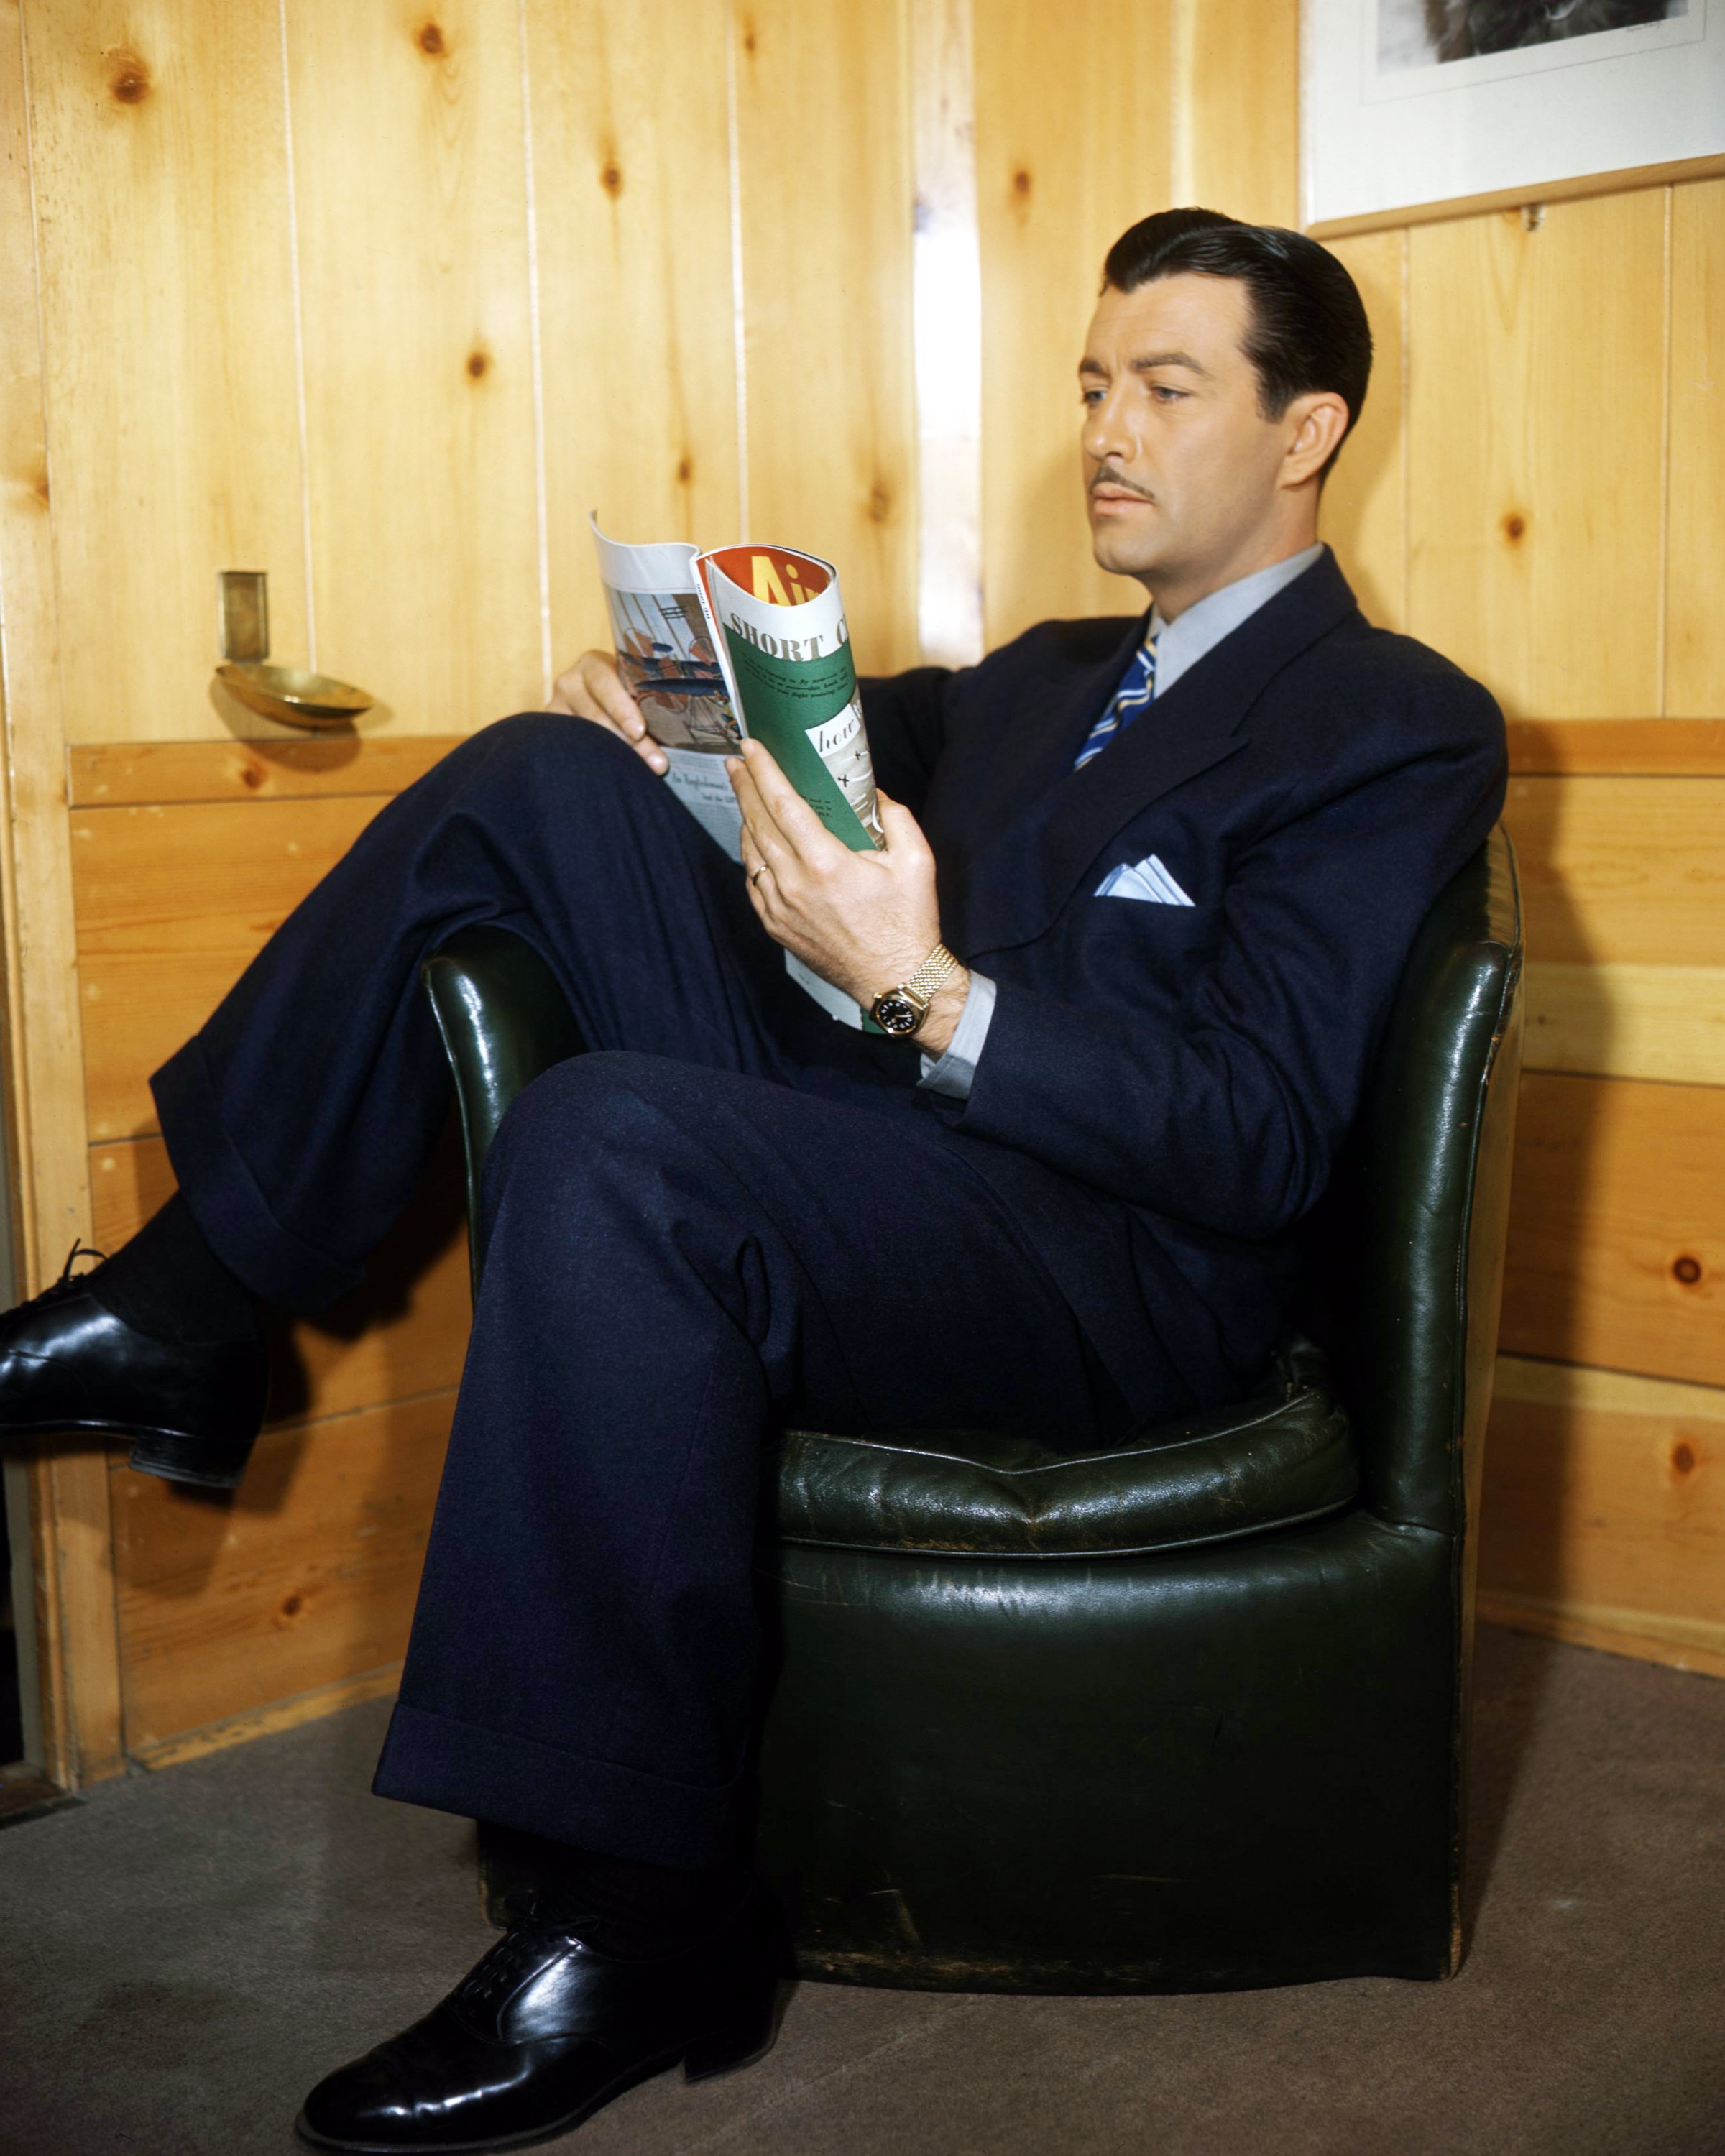 American actor Robert Taylor (1911 - 1969) sitting in an armchair and reading a magazine, circa 1940. | Source: Getty Images